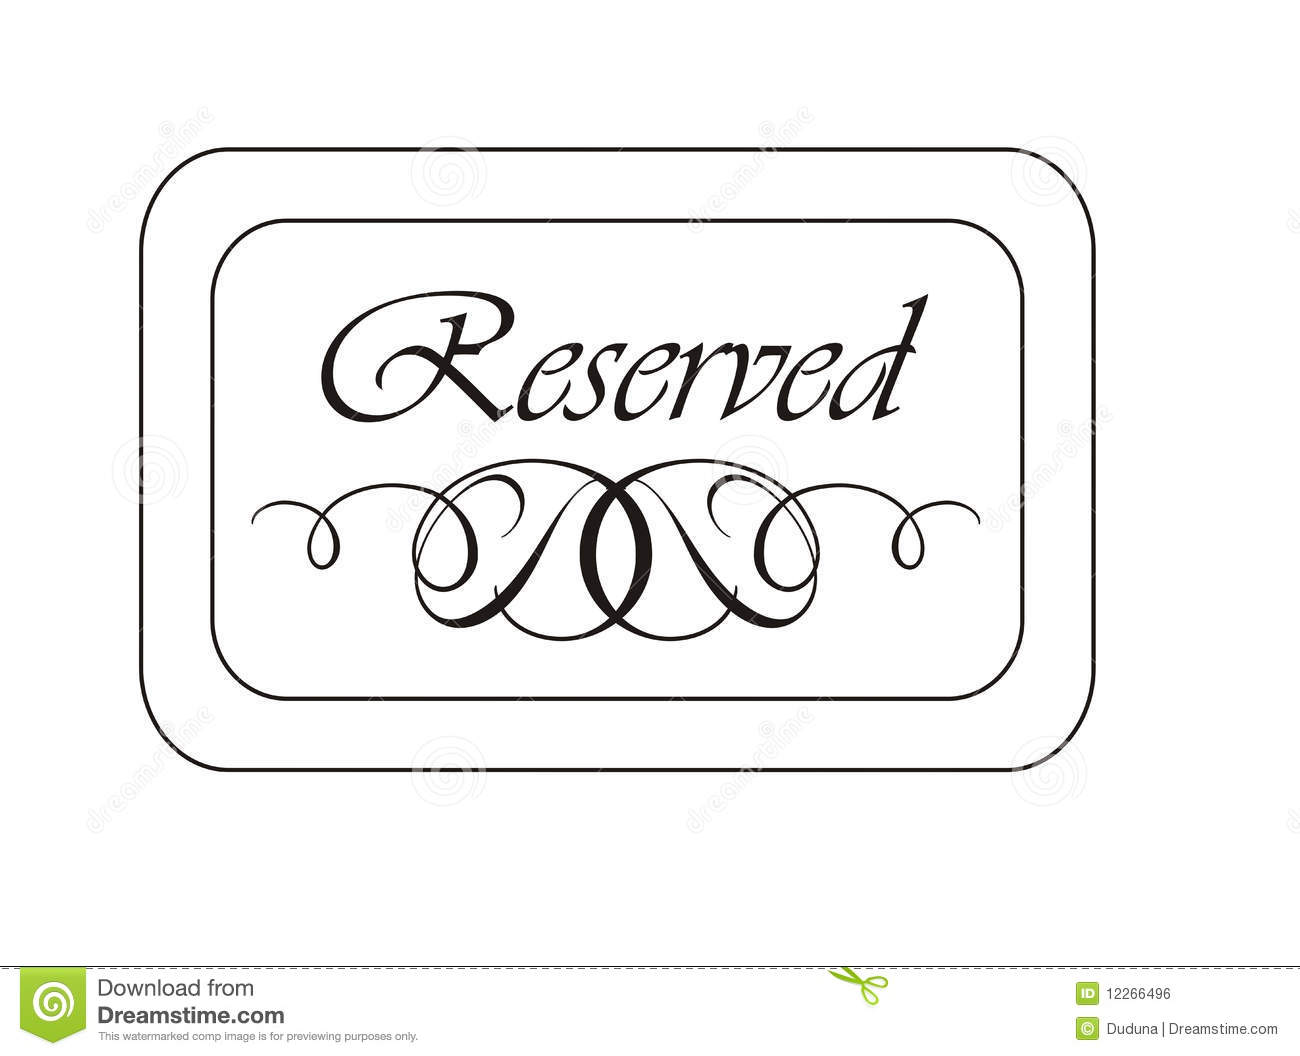 Reserved Sign Royalty Free Stock Image   Image  12266496